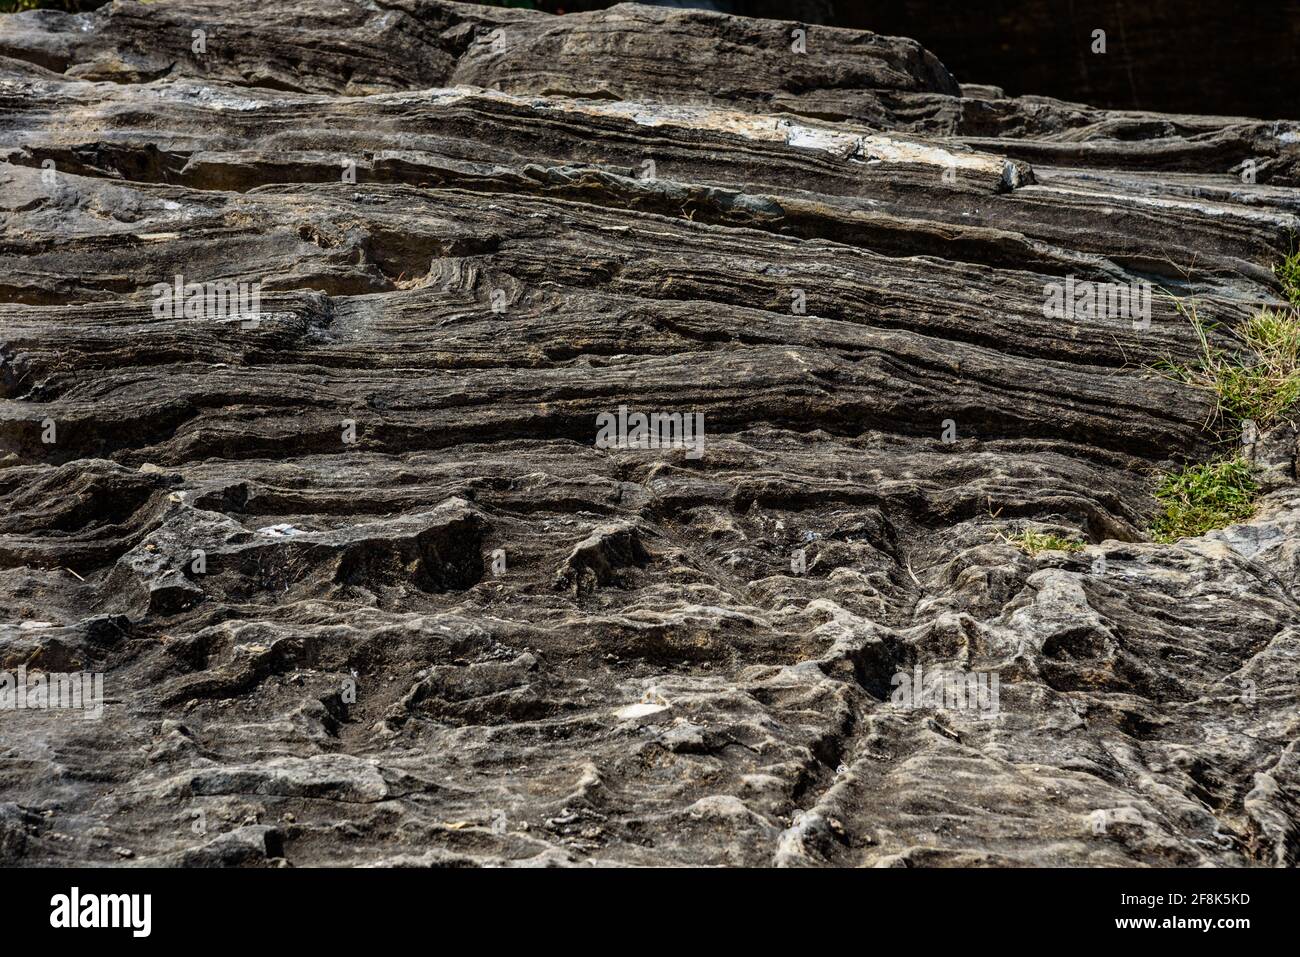 Layered intrusion is sill-like body of mafic igneous rock which exhibits vertical layering in Archean cratons due to convection,thermal diffusion, set Stock Photo